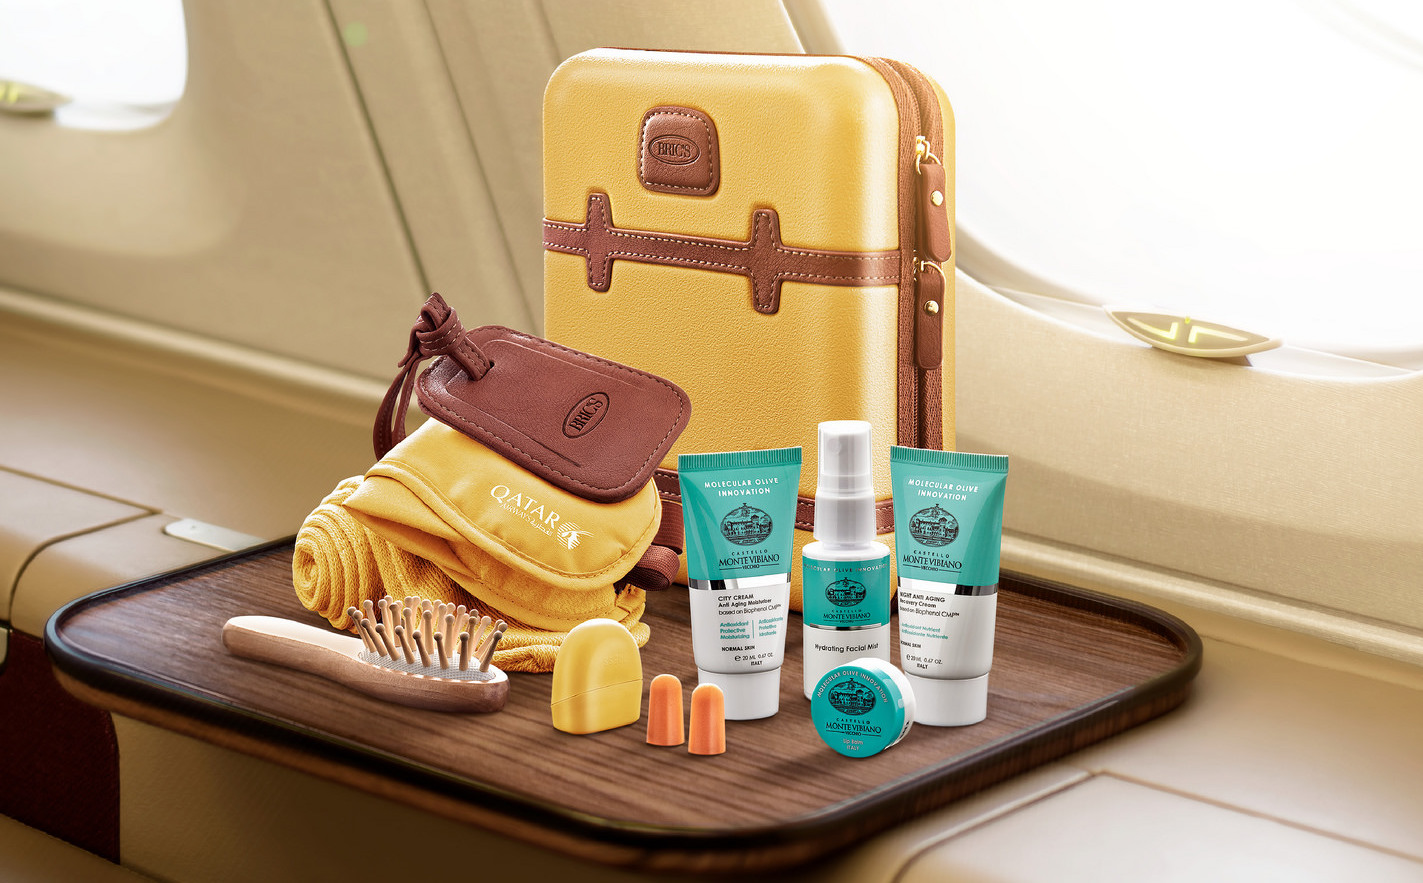 first-class-amenity-kits-travellersofindia.com